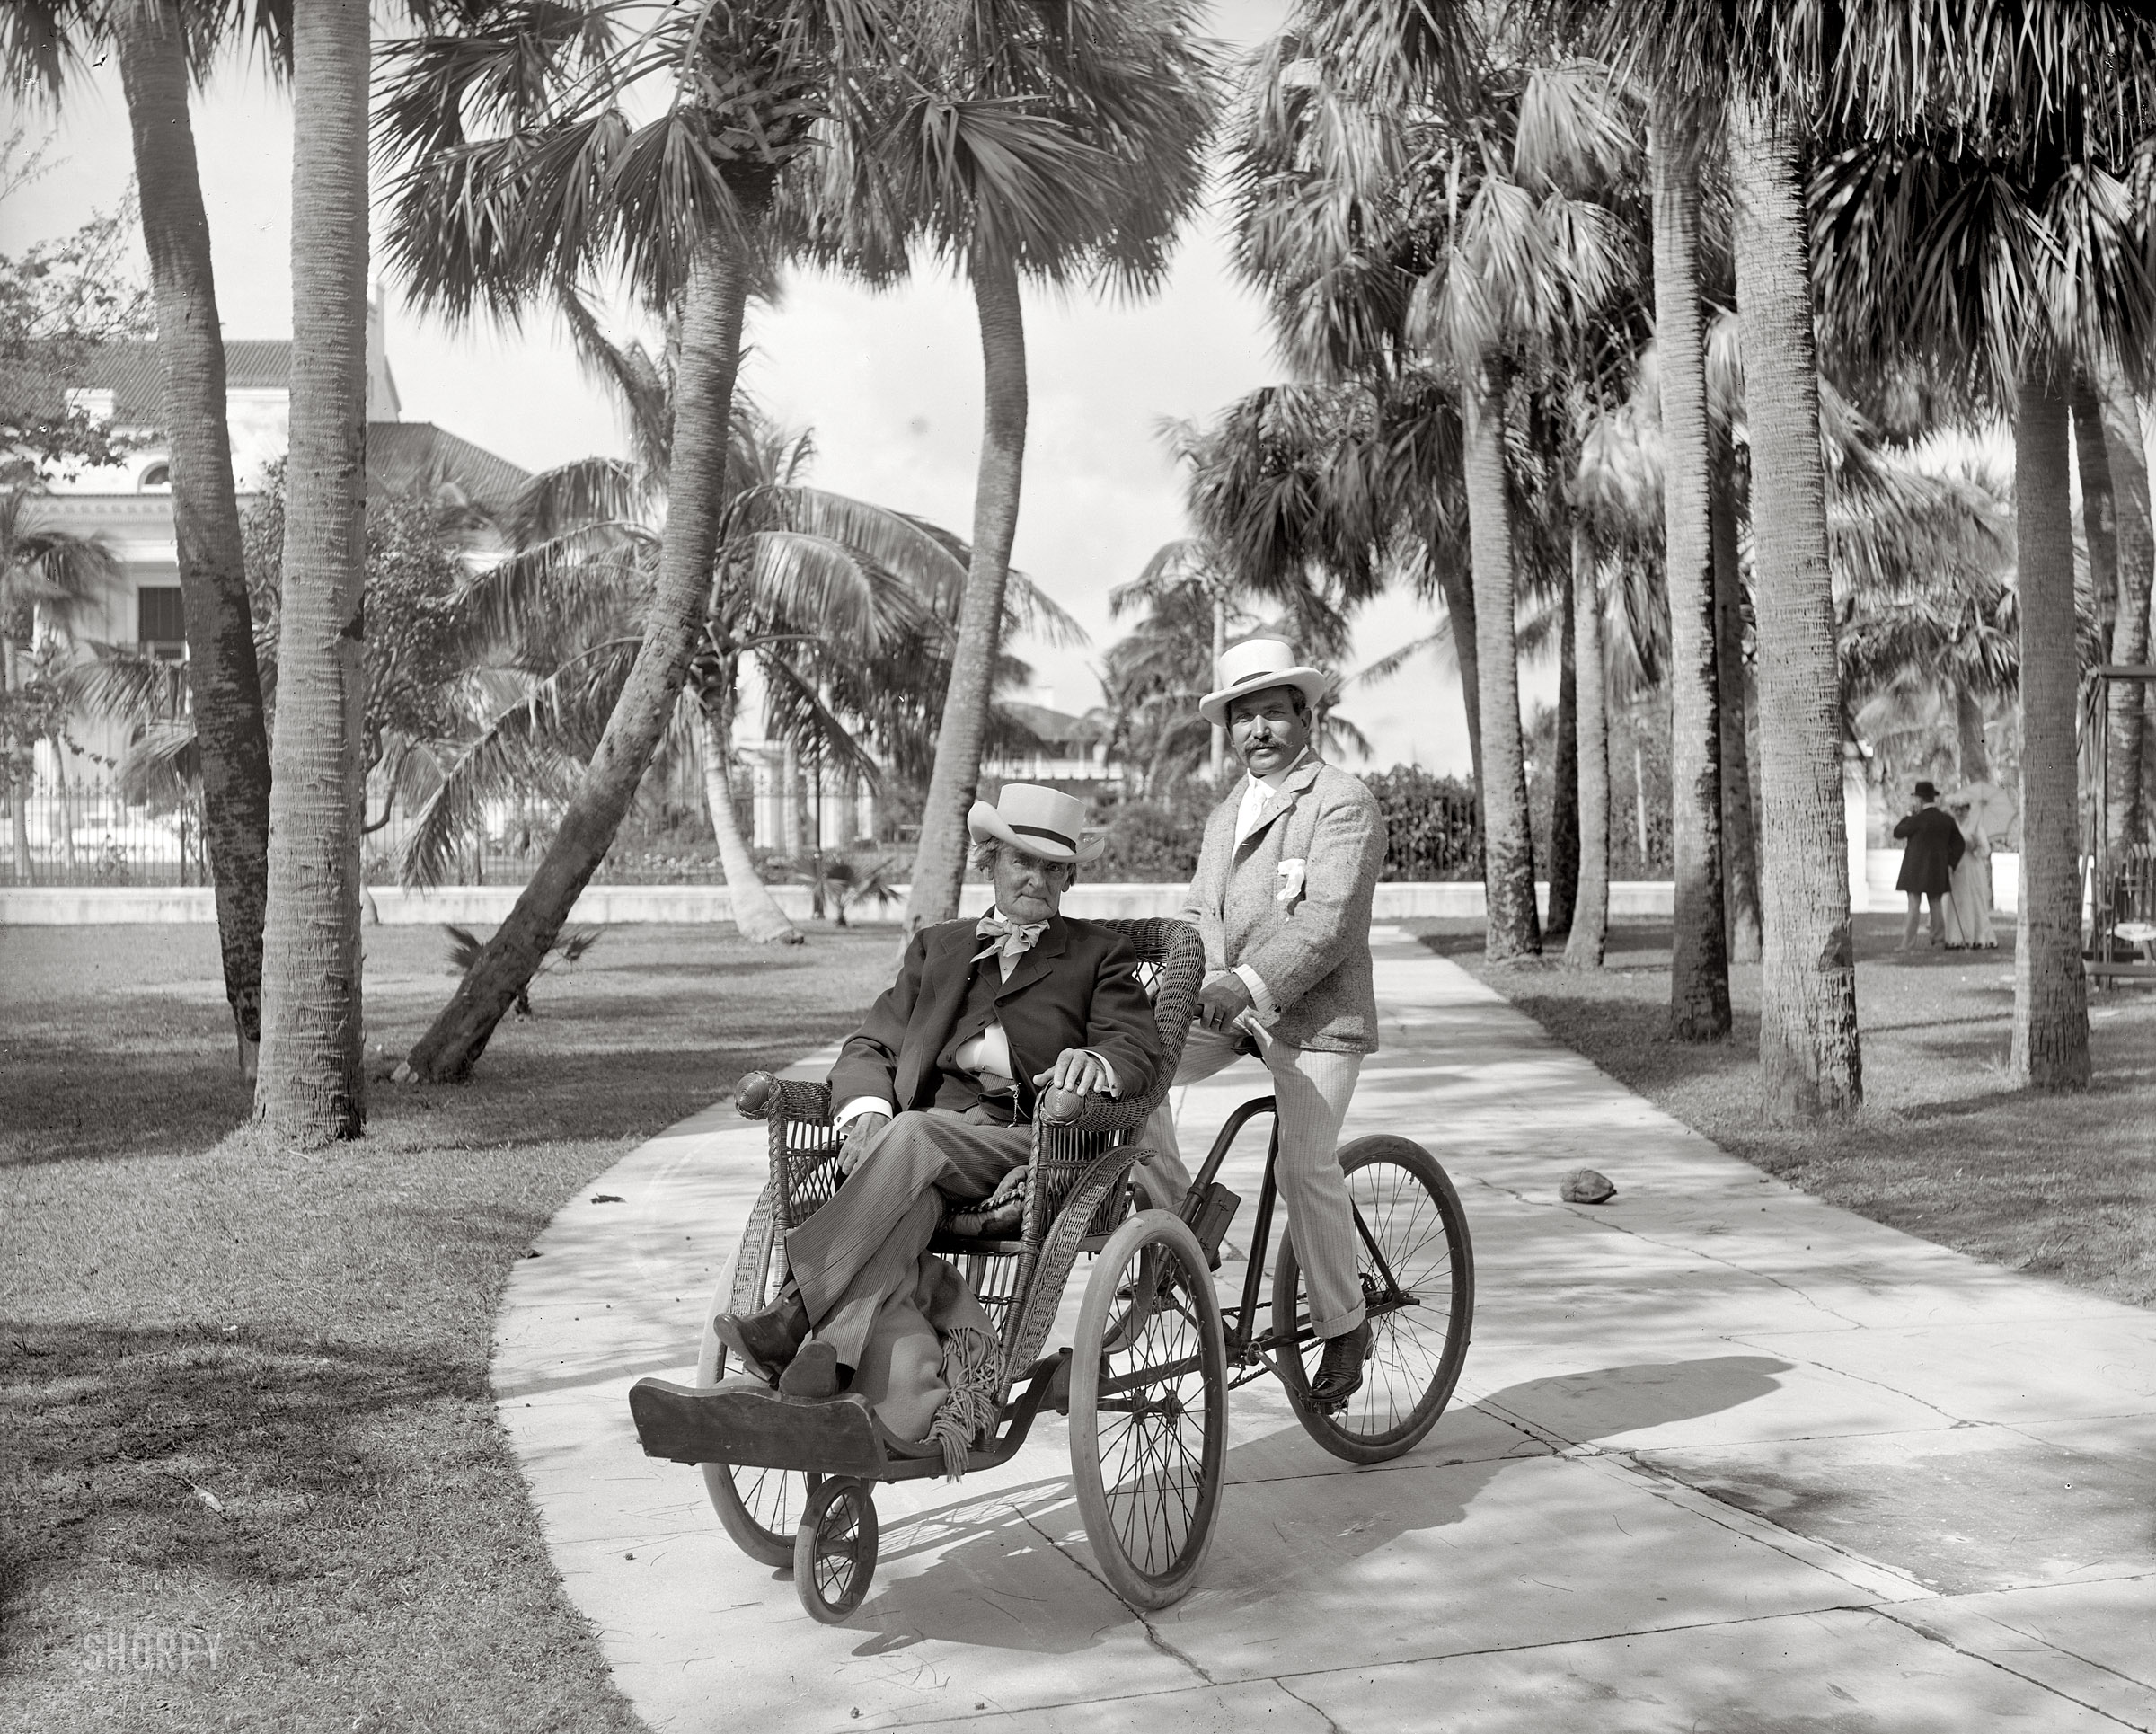 Florida circa 1904. "Joe Jefferson at Palm Beach." The noted comic actor shortly before his death. Dry plate glass negative, Detroit Publishing Co. View full size.